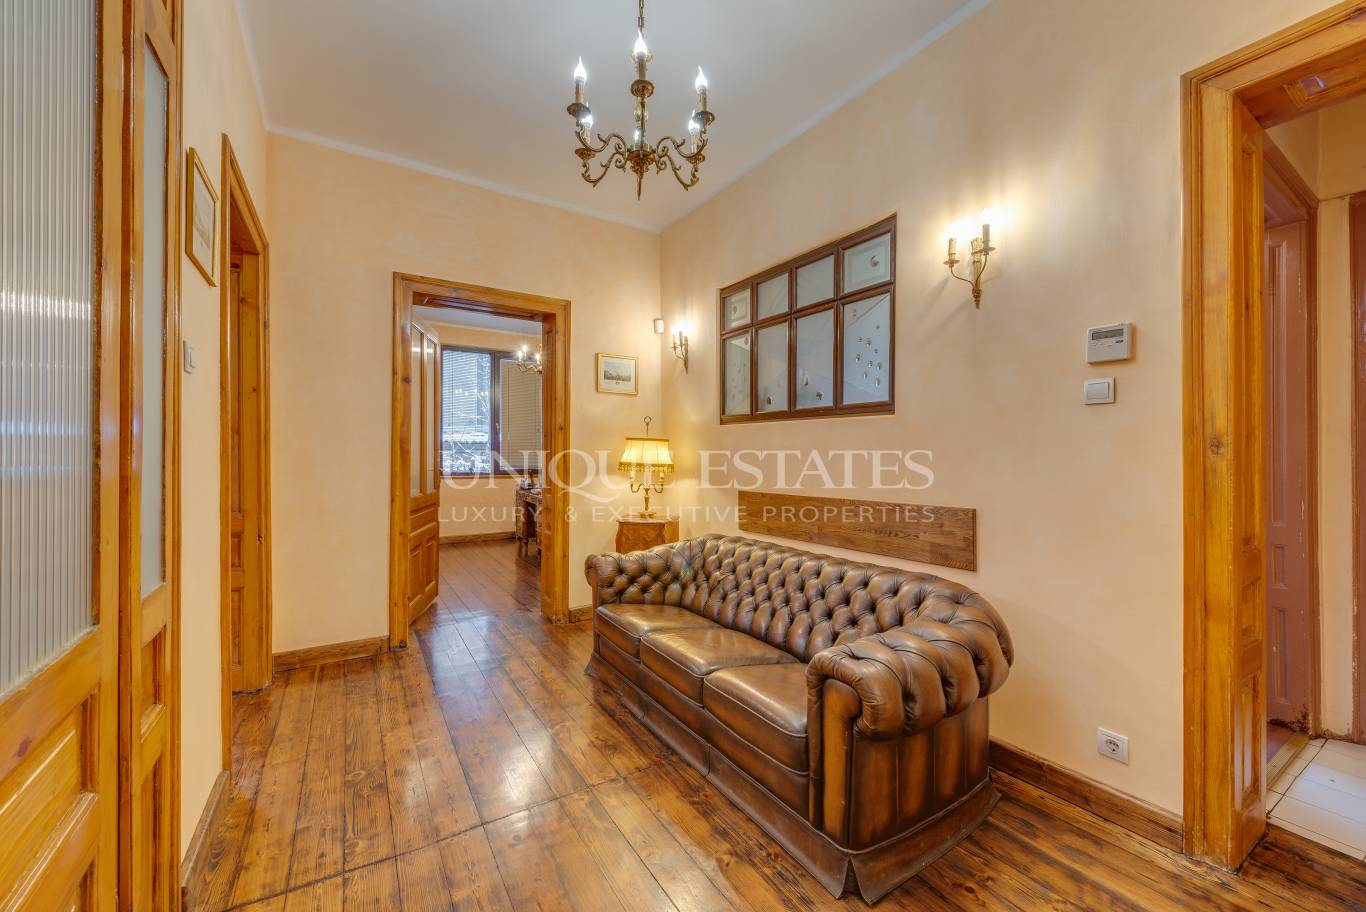 House for sale in Sofia, Oborishte with listing ID: K10563 - image 7